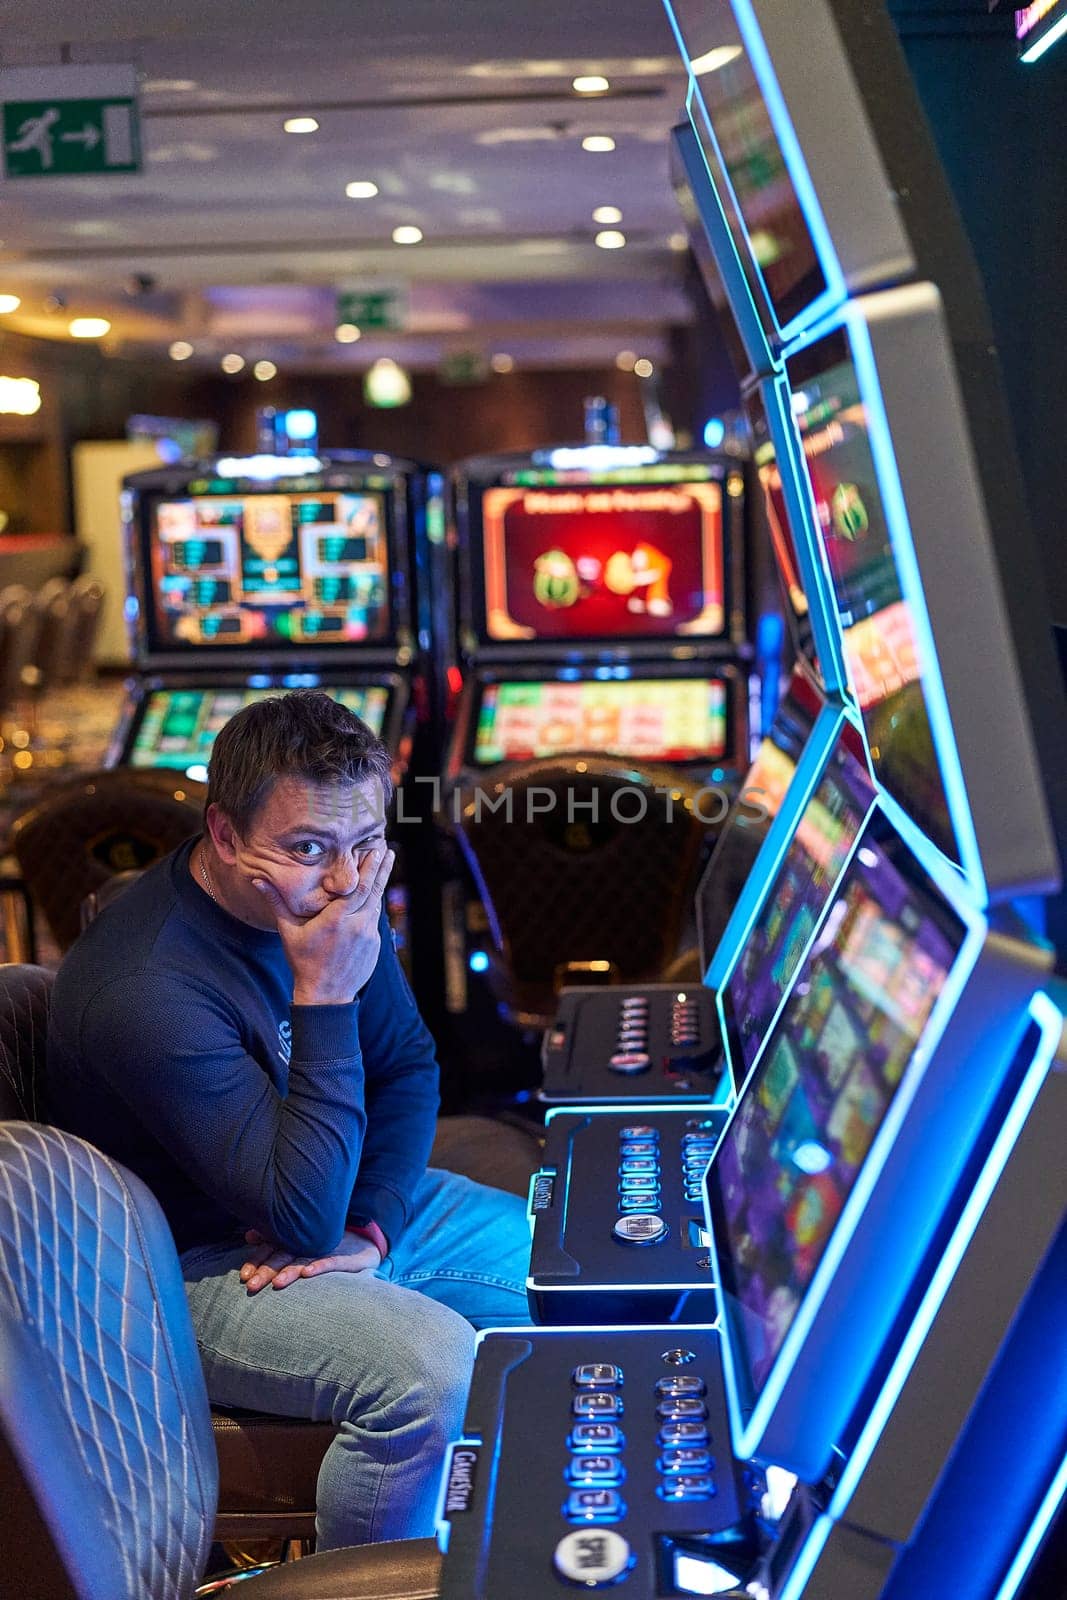 Man plays in casino on slot machines and snitty in upset feelings